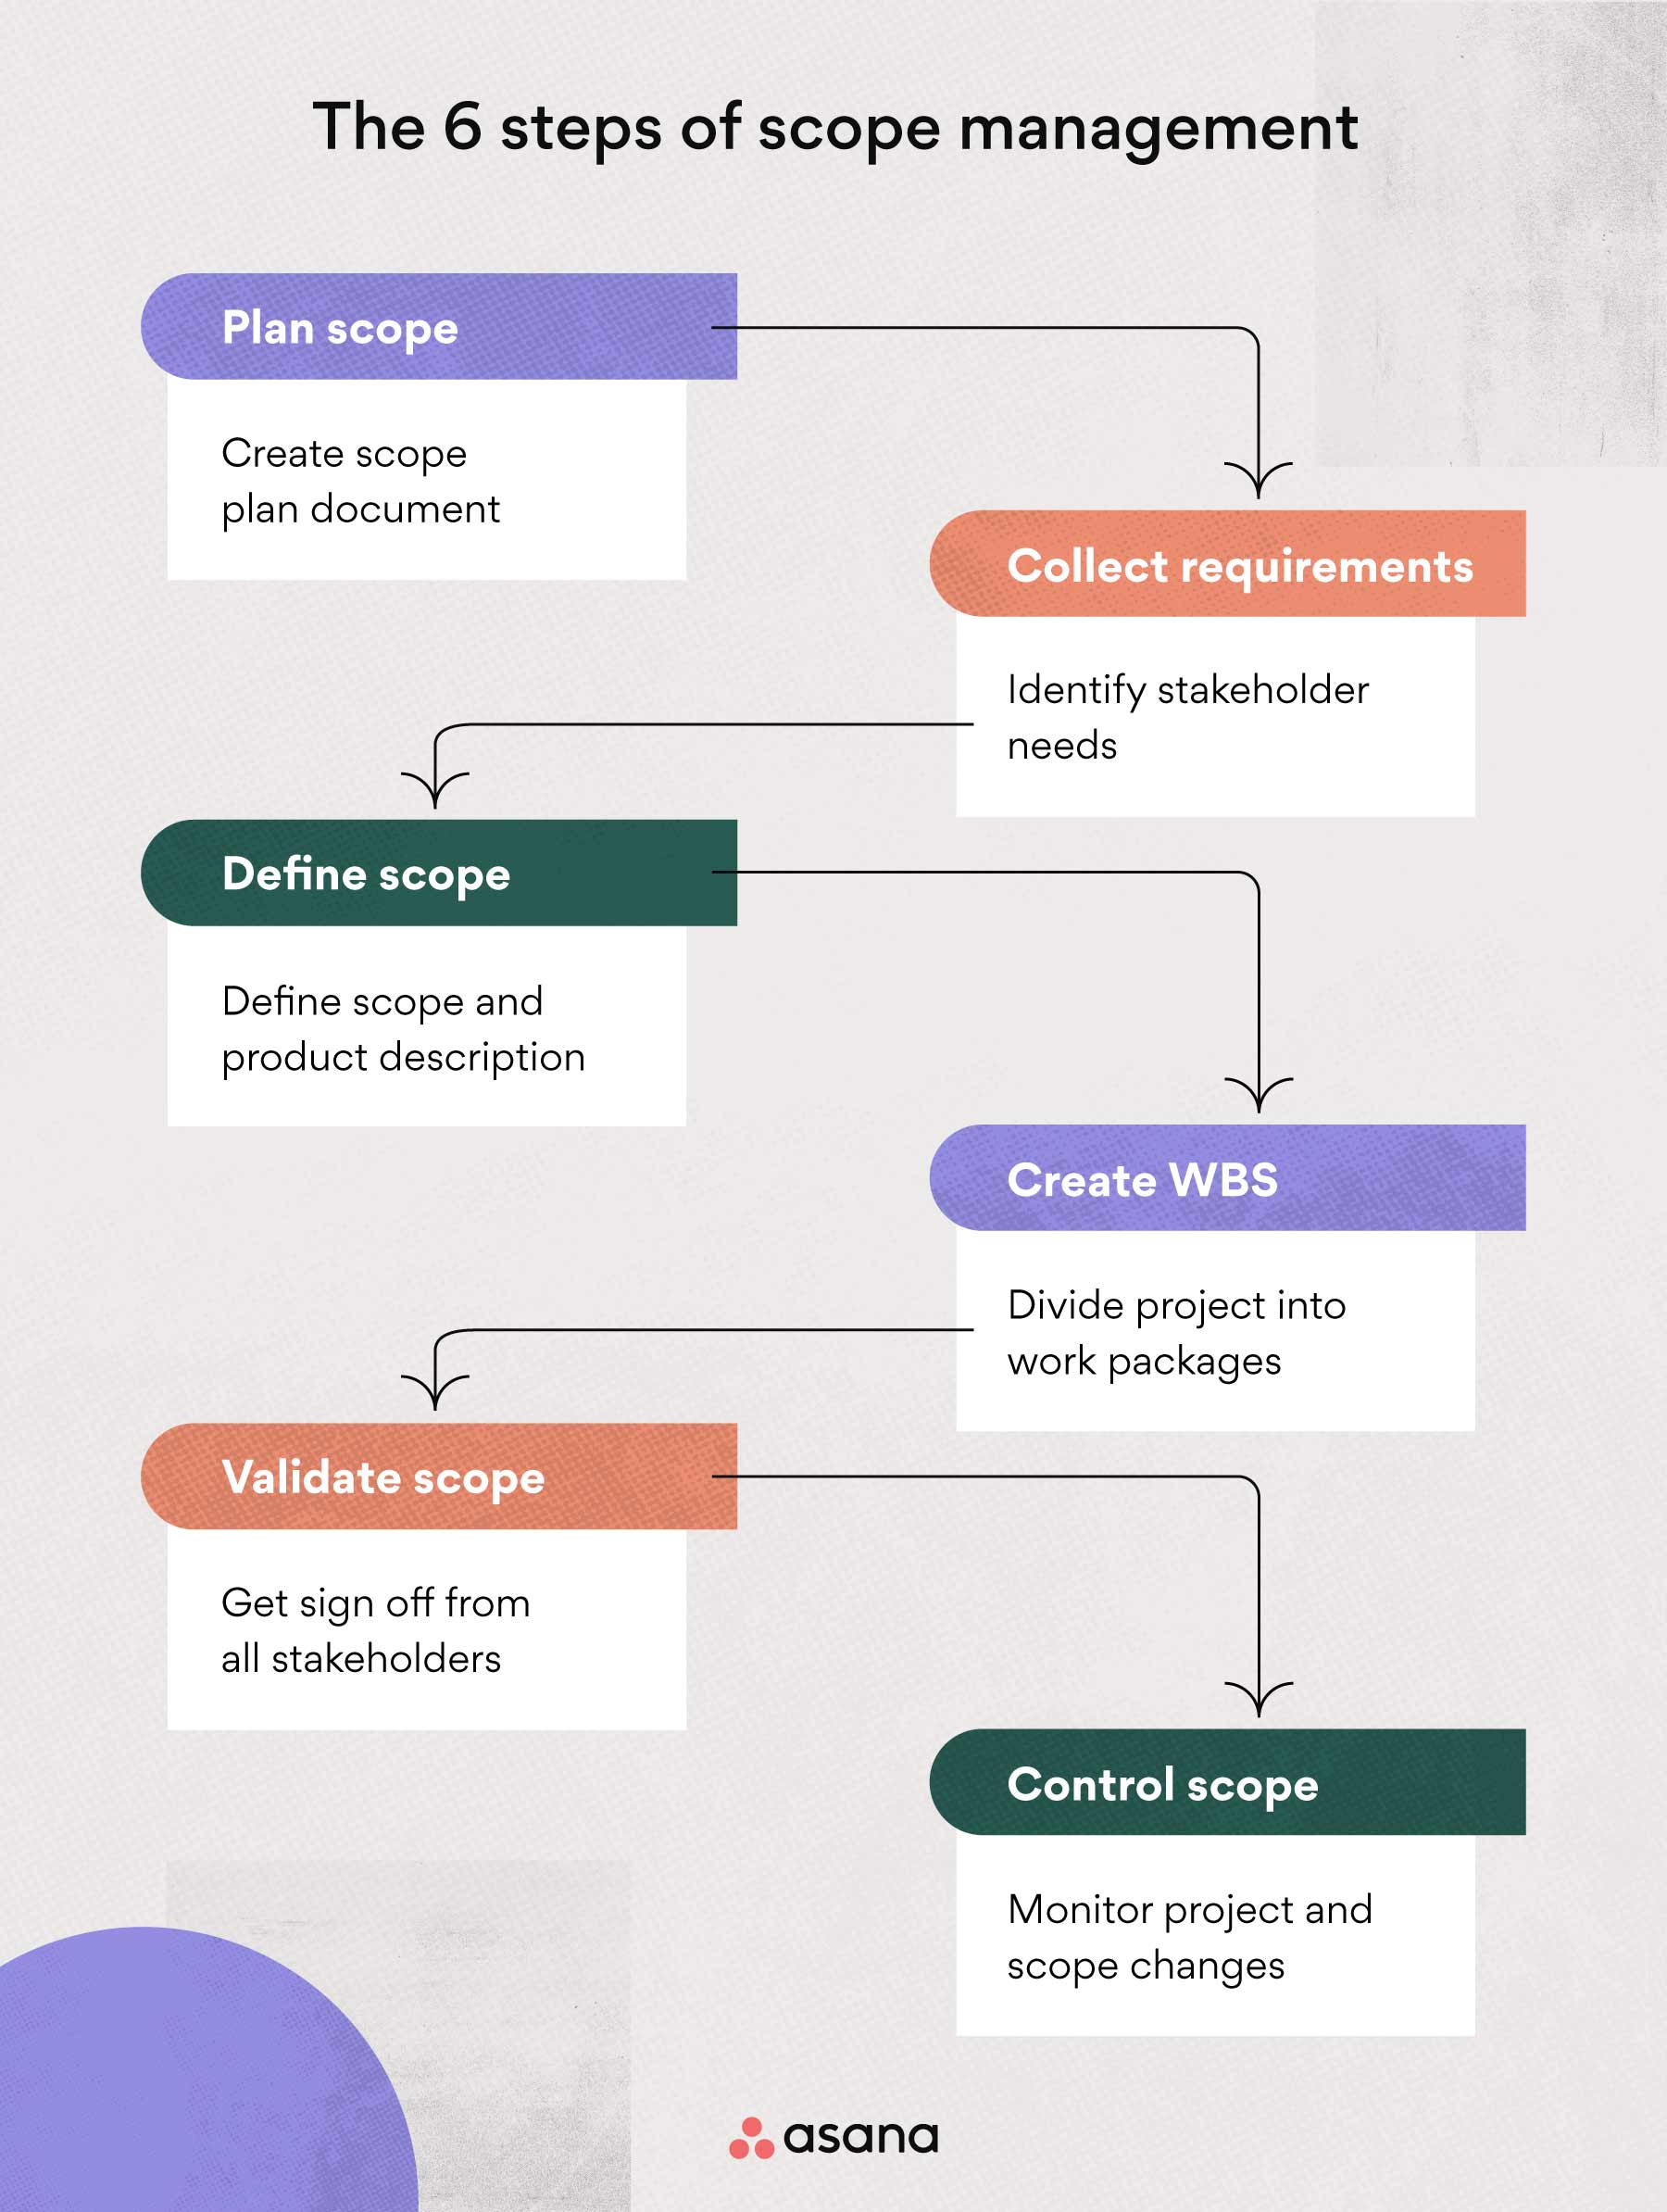 The 6 steps of scope management